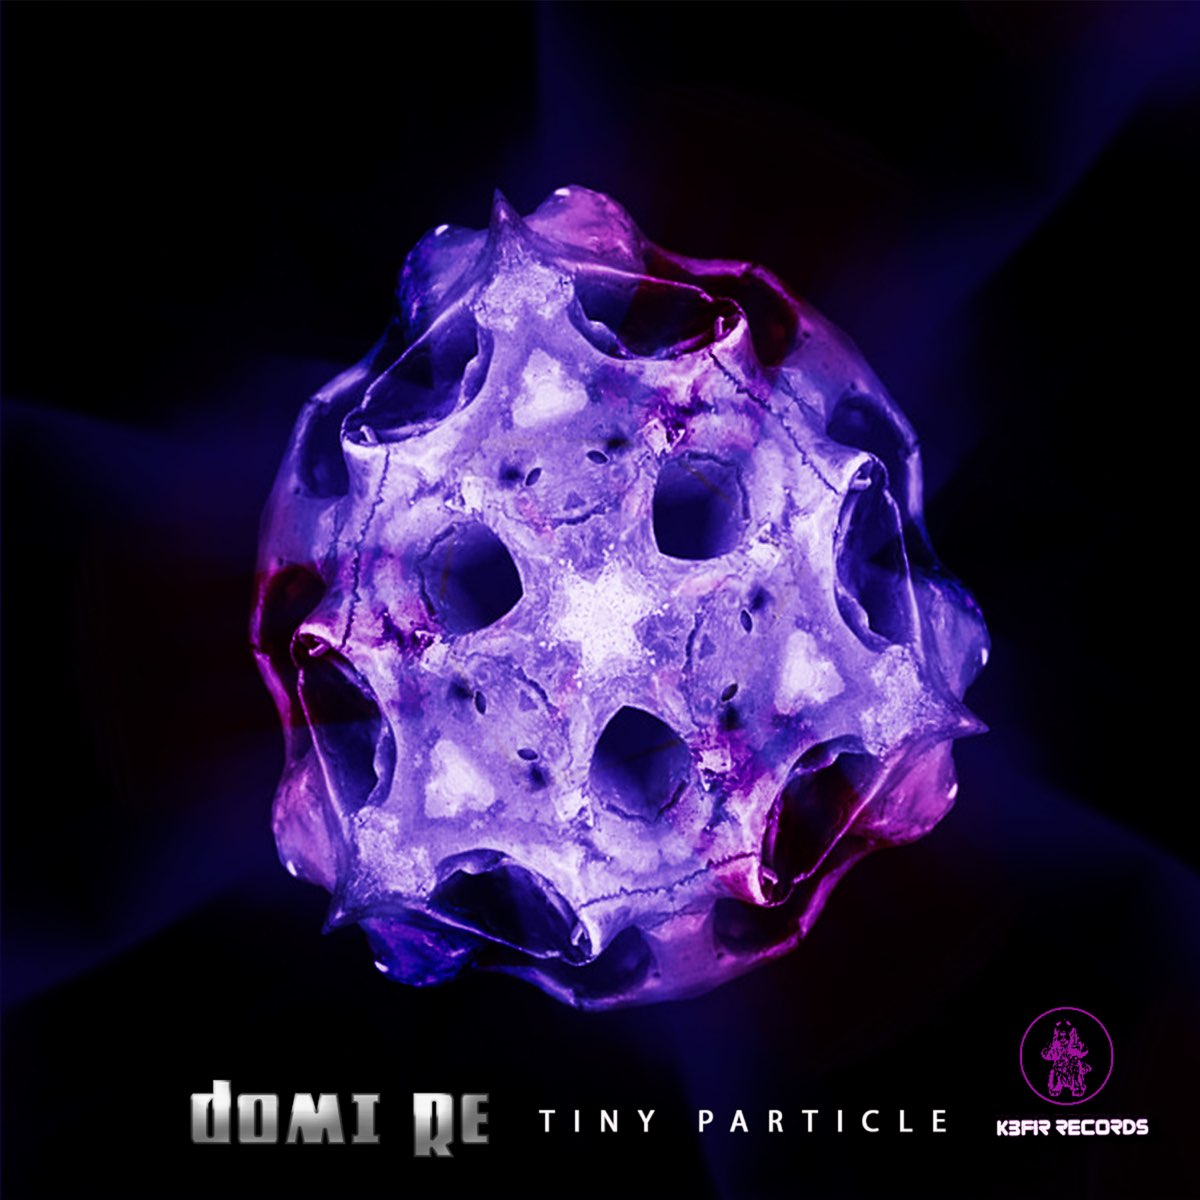 Альбом тины. Tiny Particles. Every Single Particle. (Tiny Remix).